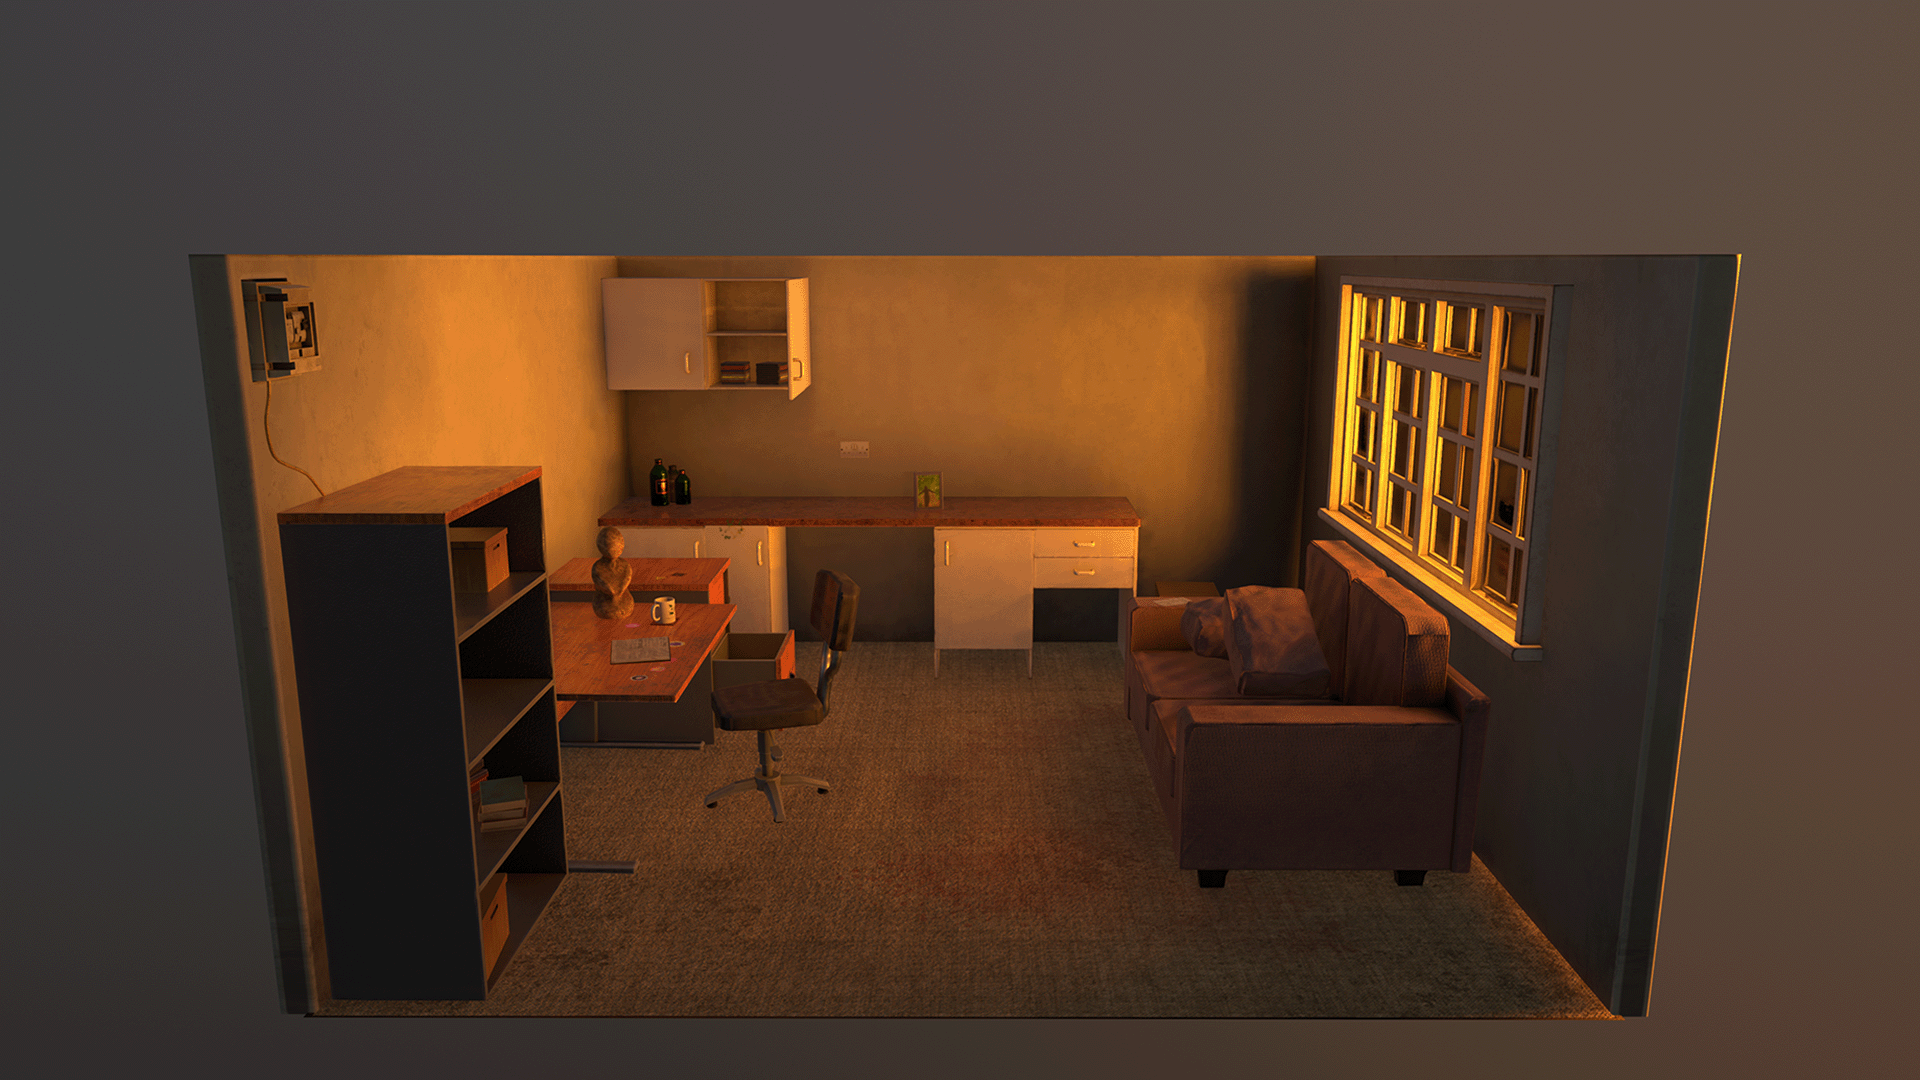 A 3D modelled space at sunset with cabinets, a desk, and a chair on the left and a sofa below a window letting in light on the right.